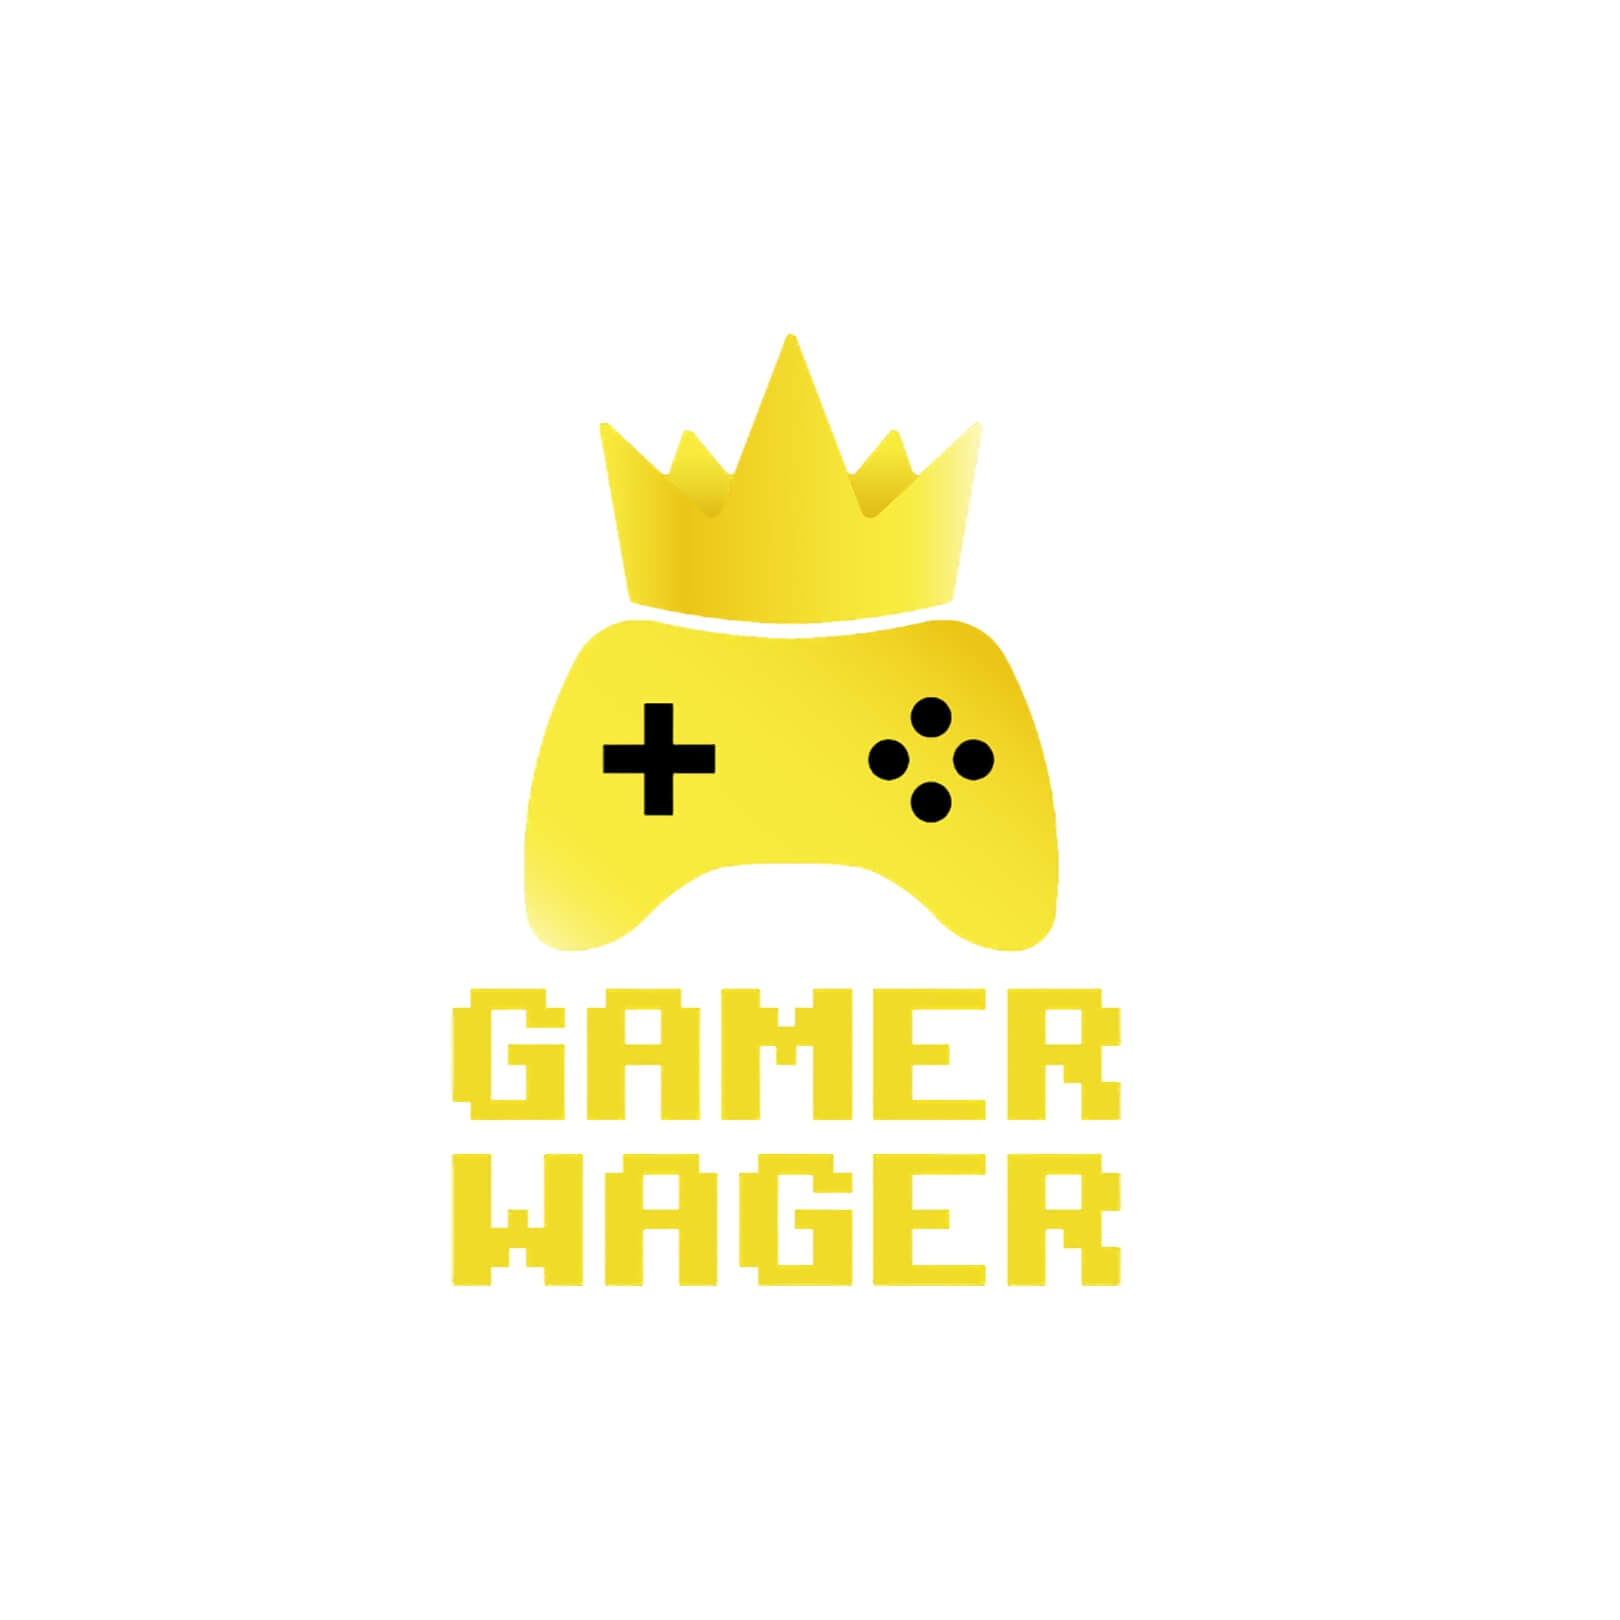 Gamer Wager To Launch A Video Game Betting Platform In The US 